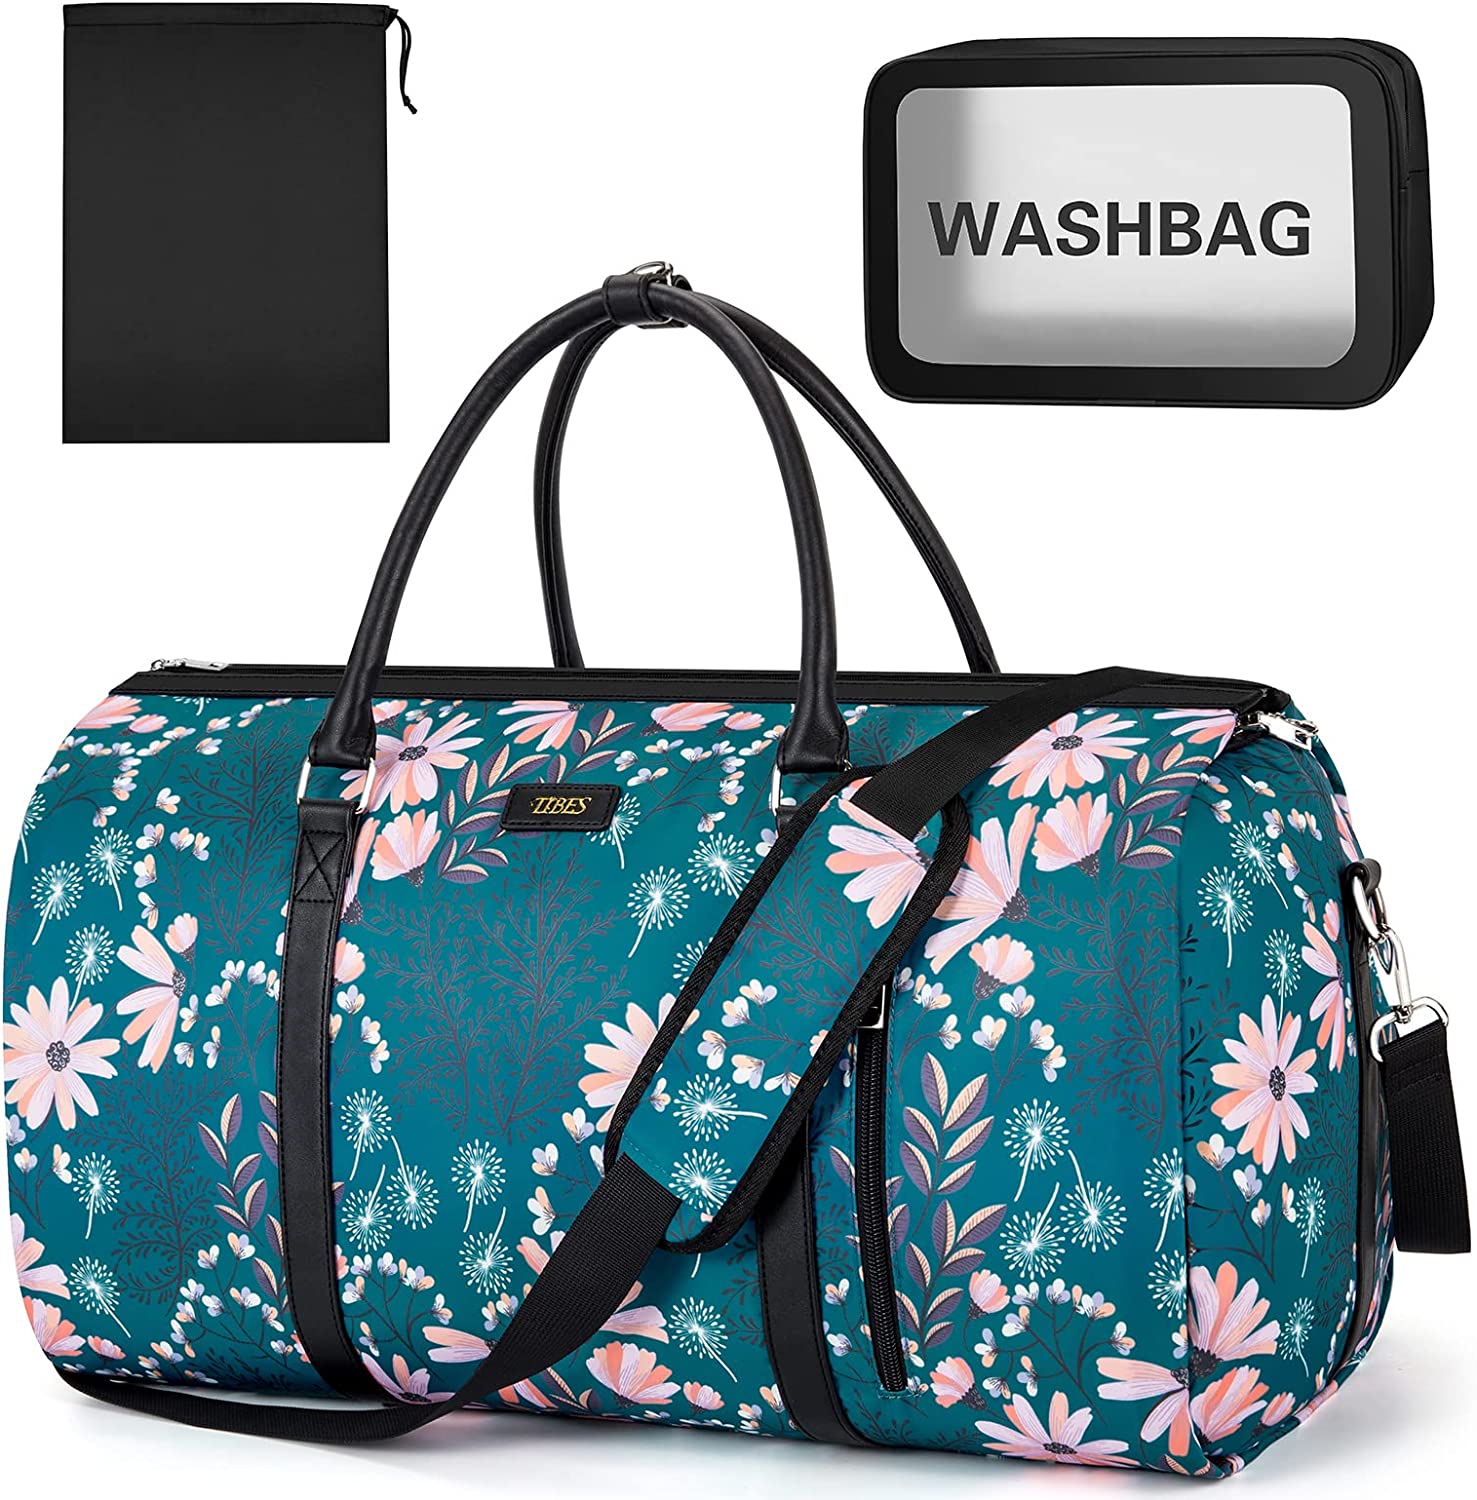 Garment Bag For Travel Convertible Carry On Garment Bag Large Travel Duffel Bags For Women 2 In 1 Hanging Suitcase Suit Travel Bags For Women & Men 3pcs Set, F Navy Floral